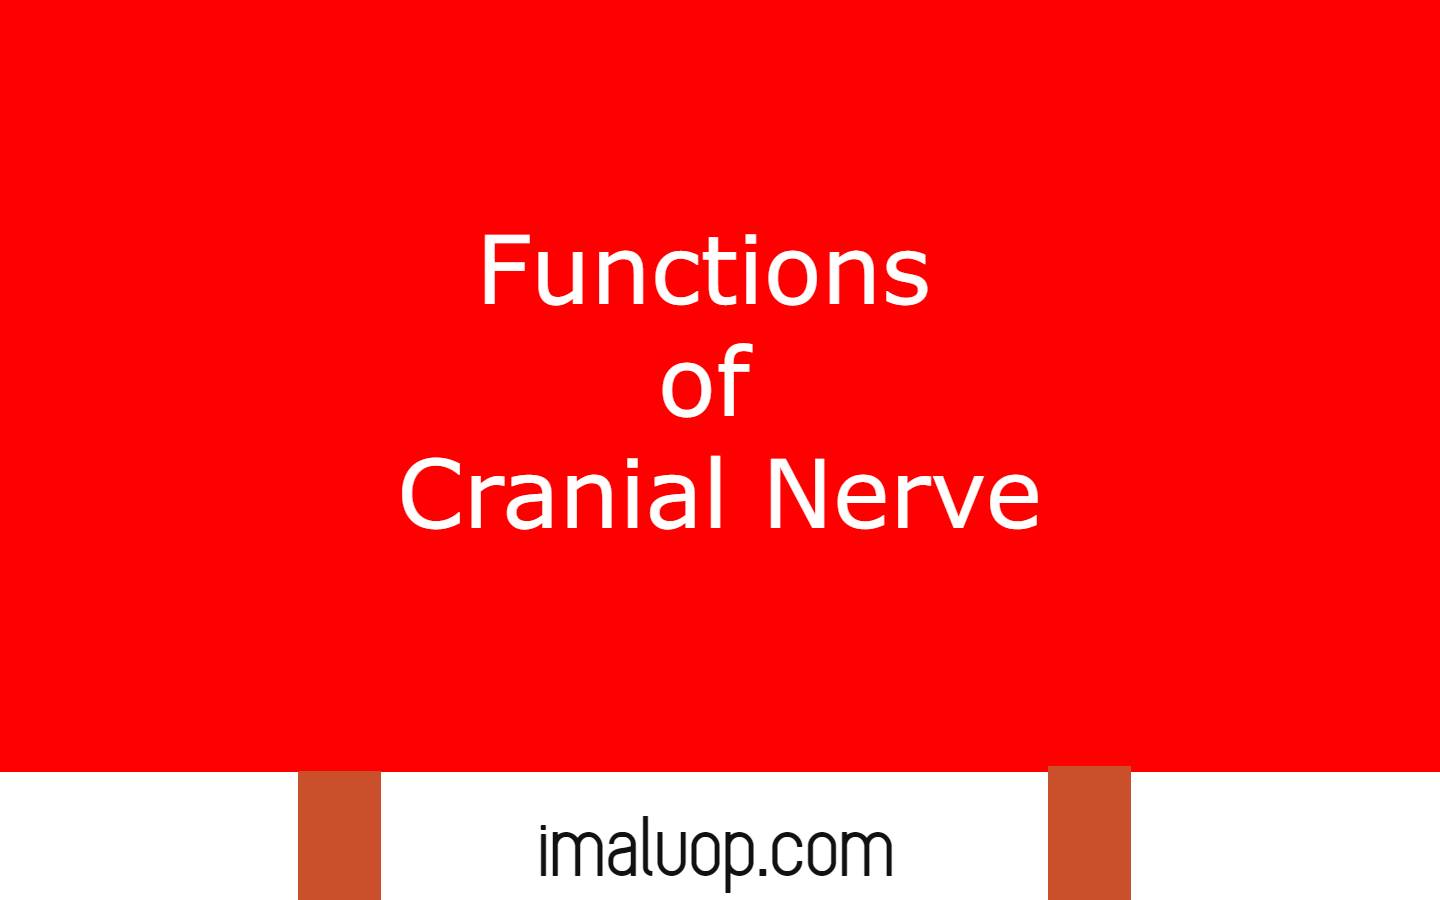 Functions of Cranial Nerve